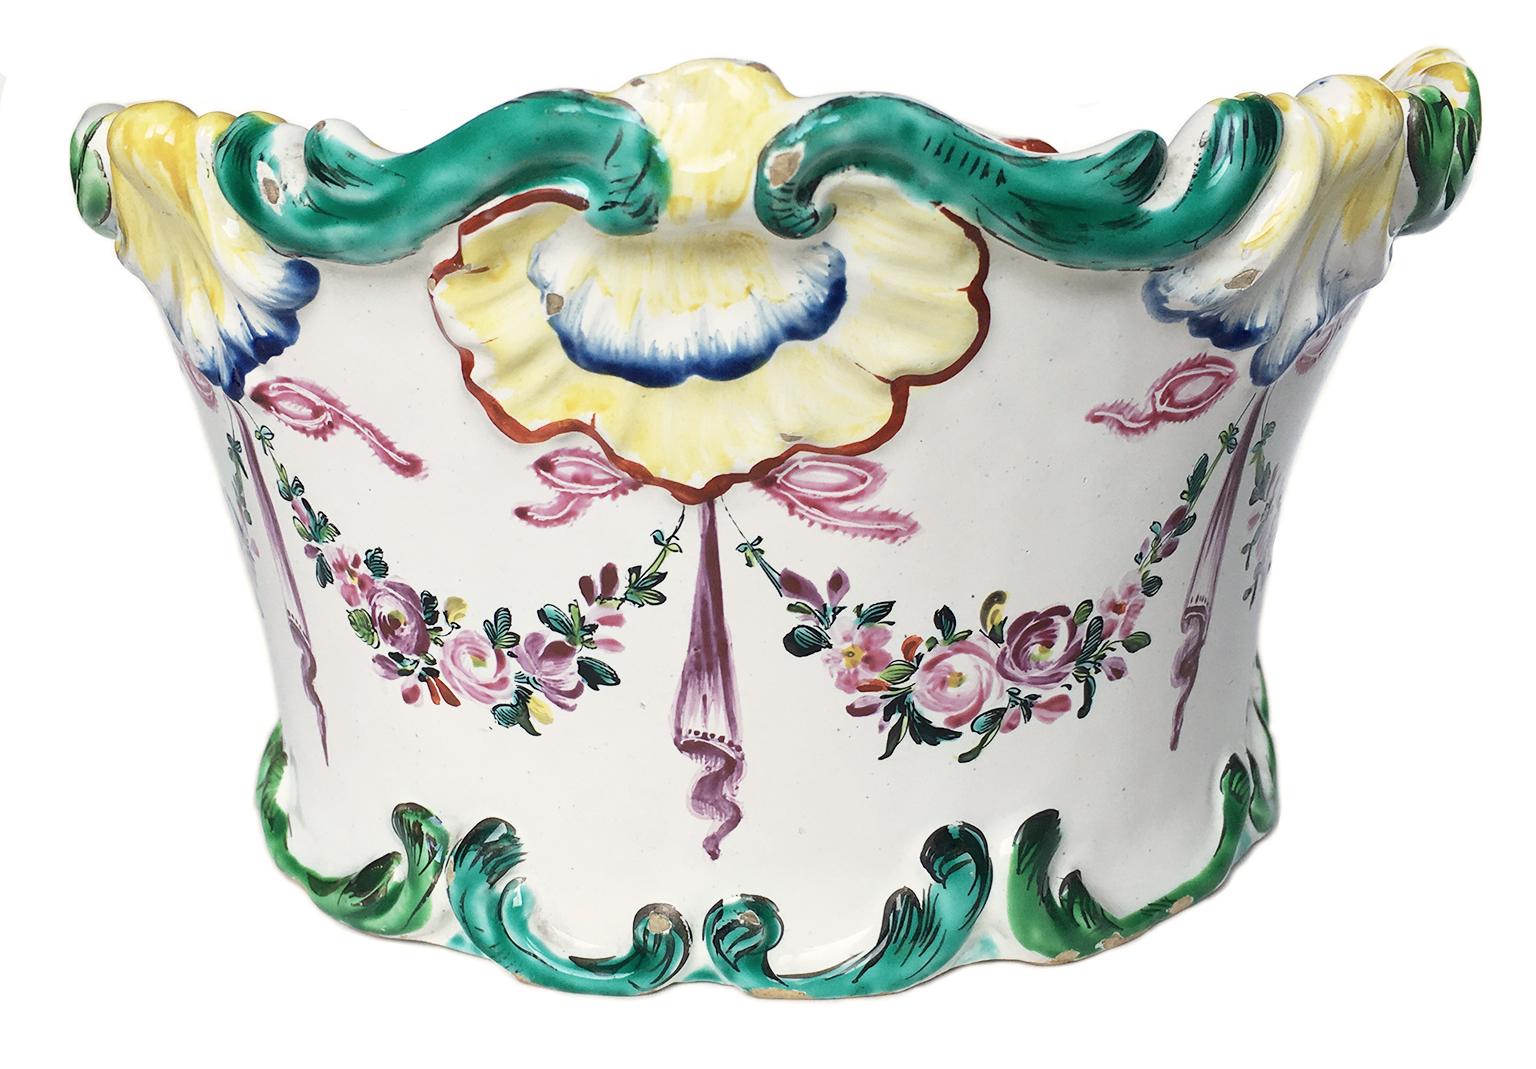 Maiolica flower pot “a mezzaluna” 
decorated with garlands of flowers

Pasquale Rubati Factory
Milan, circa 1770
Measures: 4.7 in x 5 in x 8.8 in
12 cm x 12.8 cm x 22.4 cm
lb 1.76 (kg 0.8)
State of conservation: intact with slight chipping due to